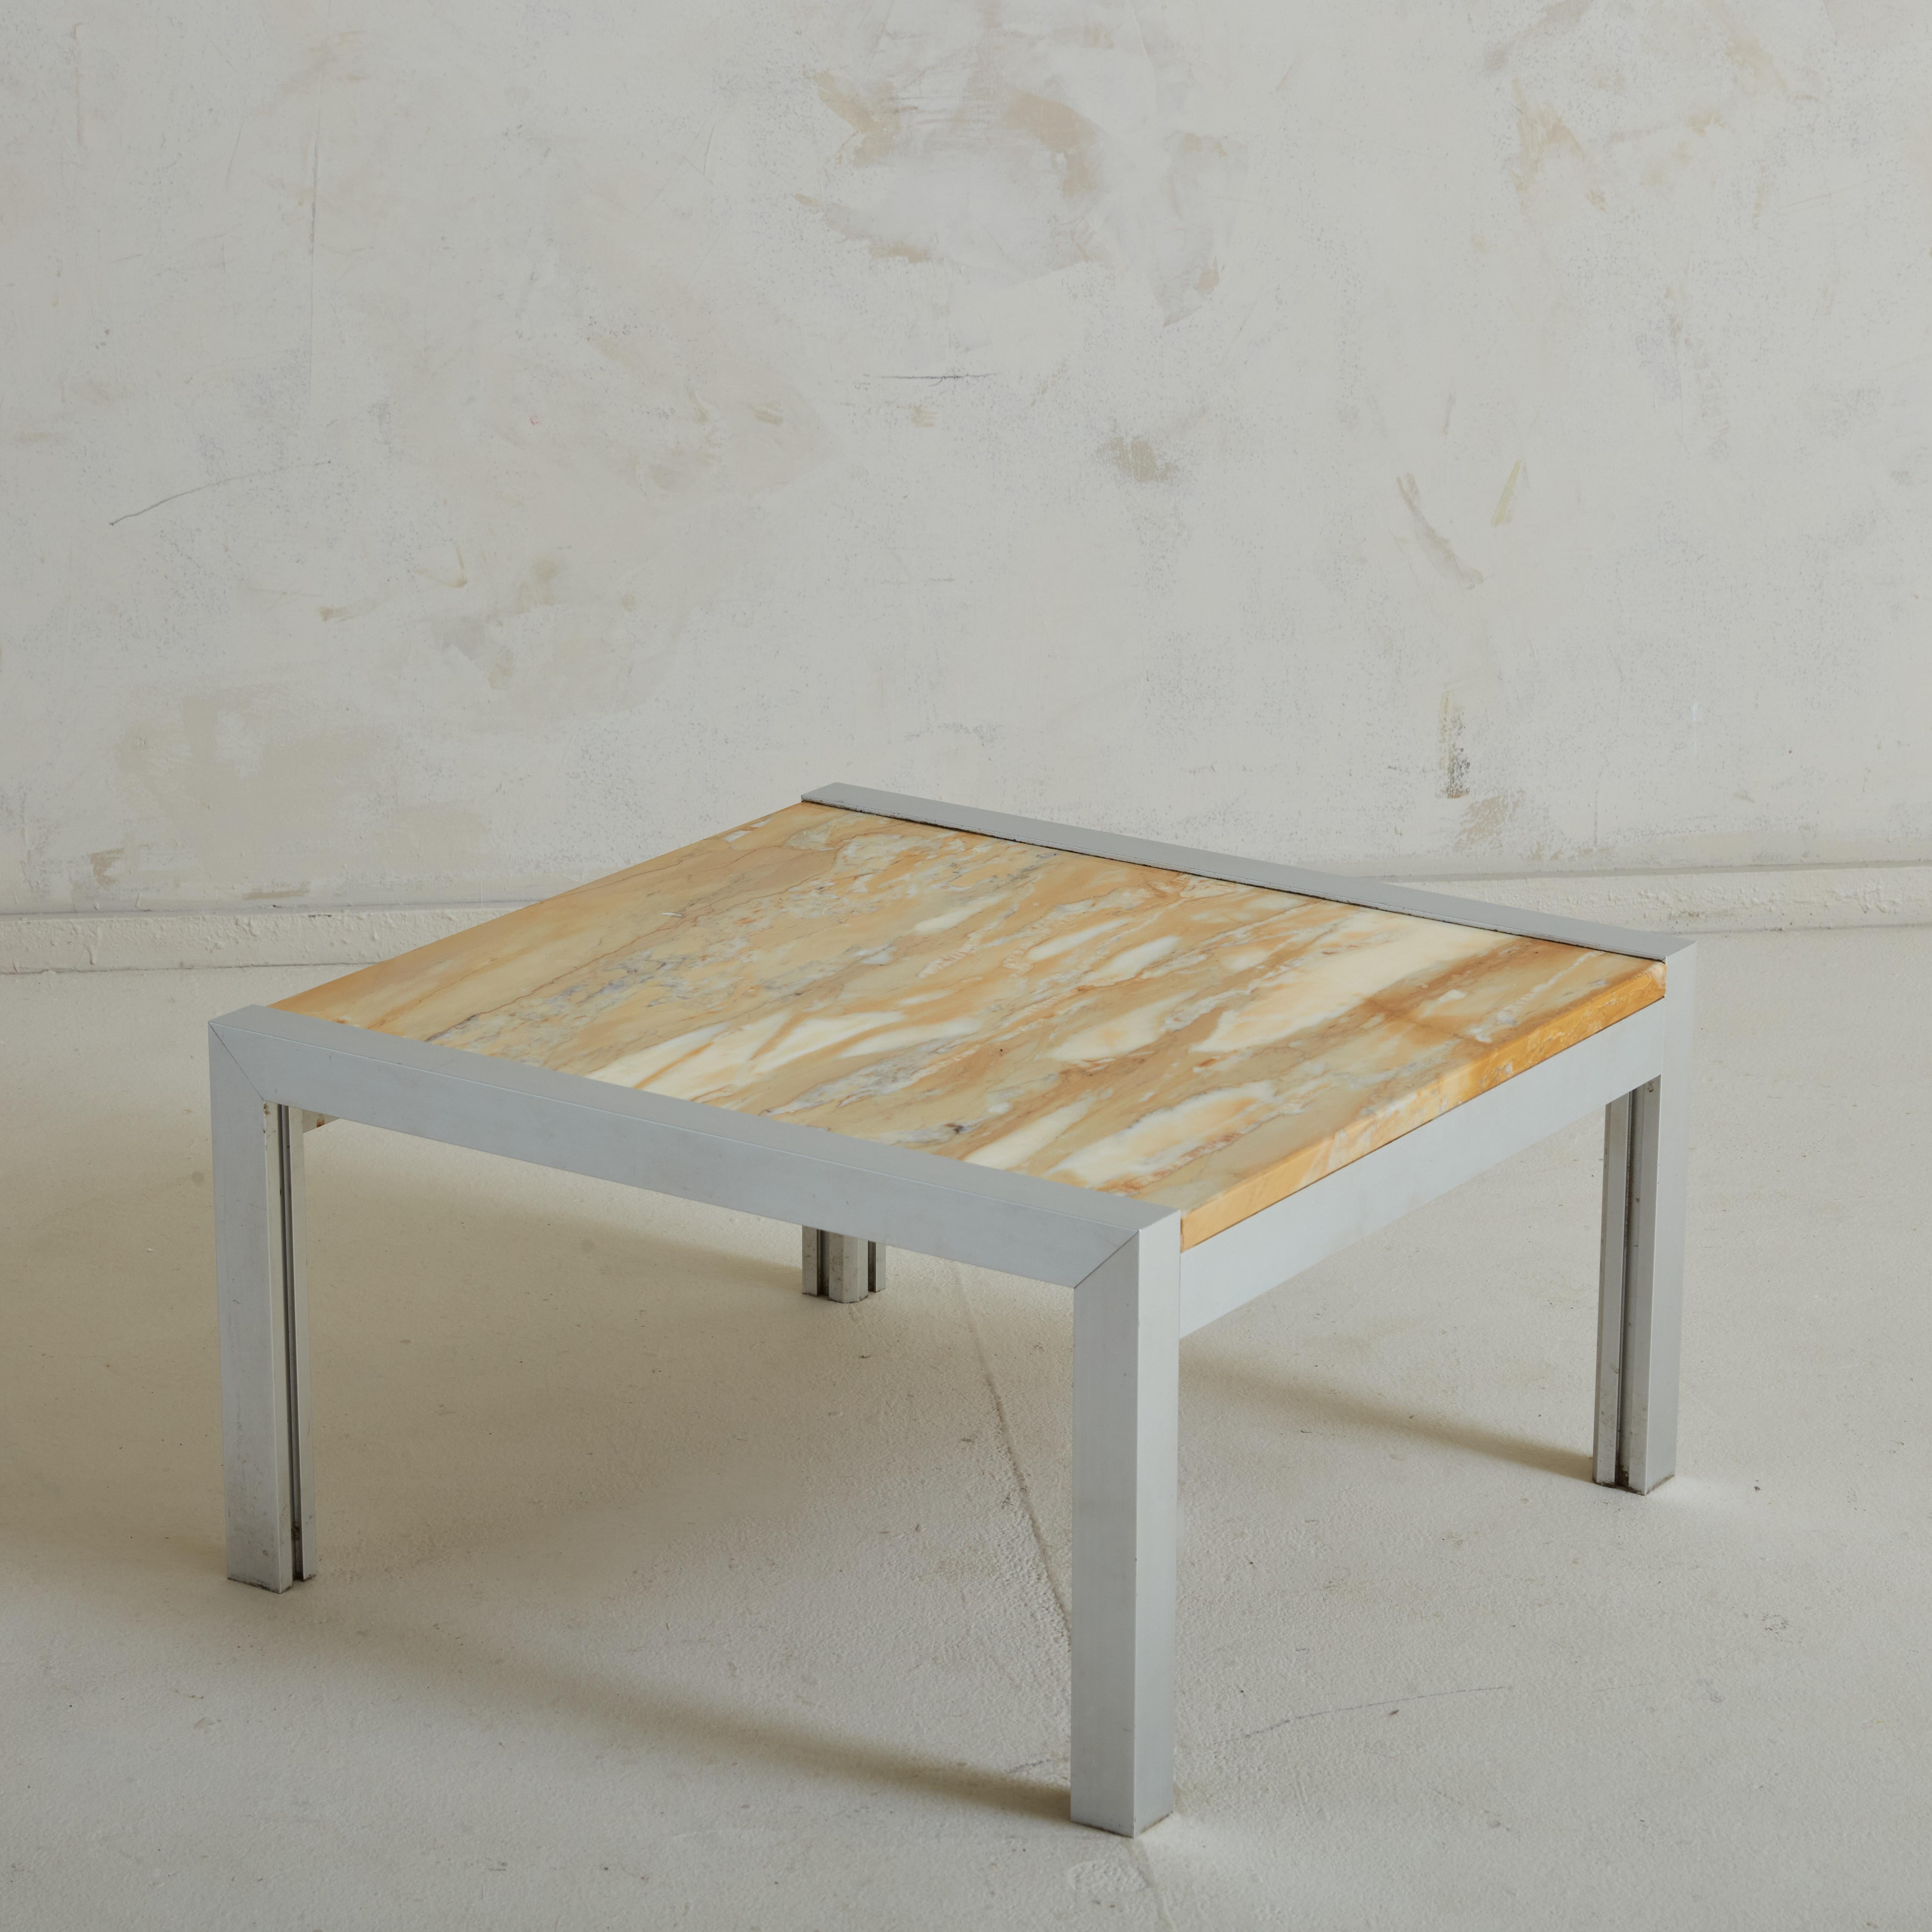 A 1970s French coffee table featuring a sleek aluminum frame with an inset onyx tabletop. This stone features an incredible range of peach hues, which contrast beautifully with the minimal lines of the base. Both simple and complex, this table is